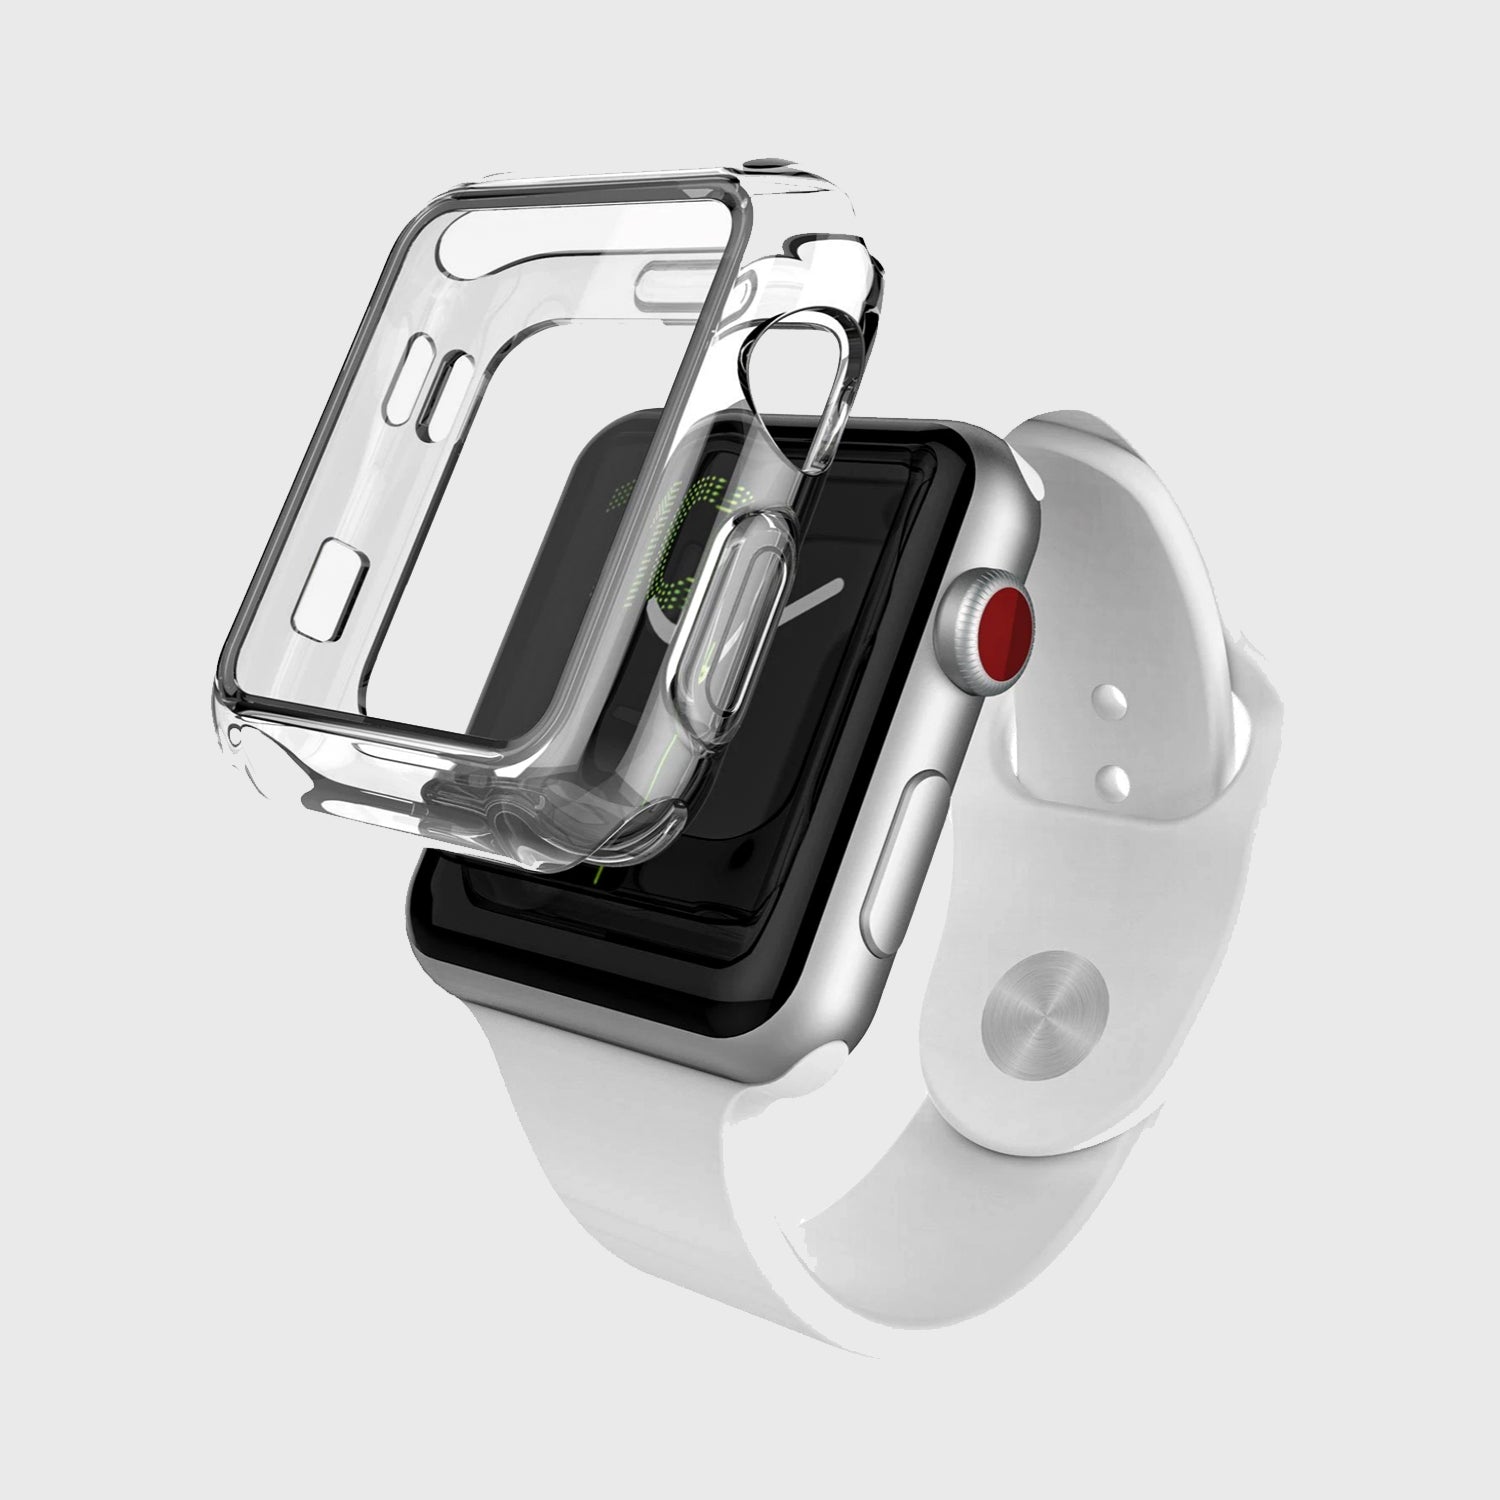 A clear X-Doria Defense 360x Bumper Case for the 44mm Apple Watch on a white background.